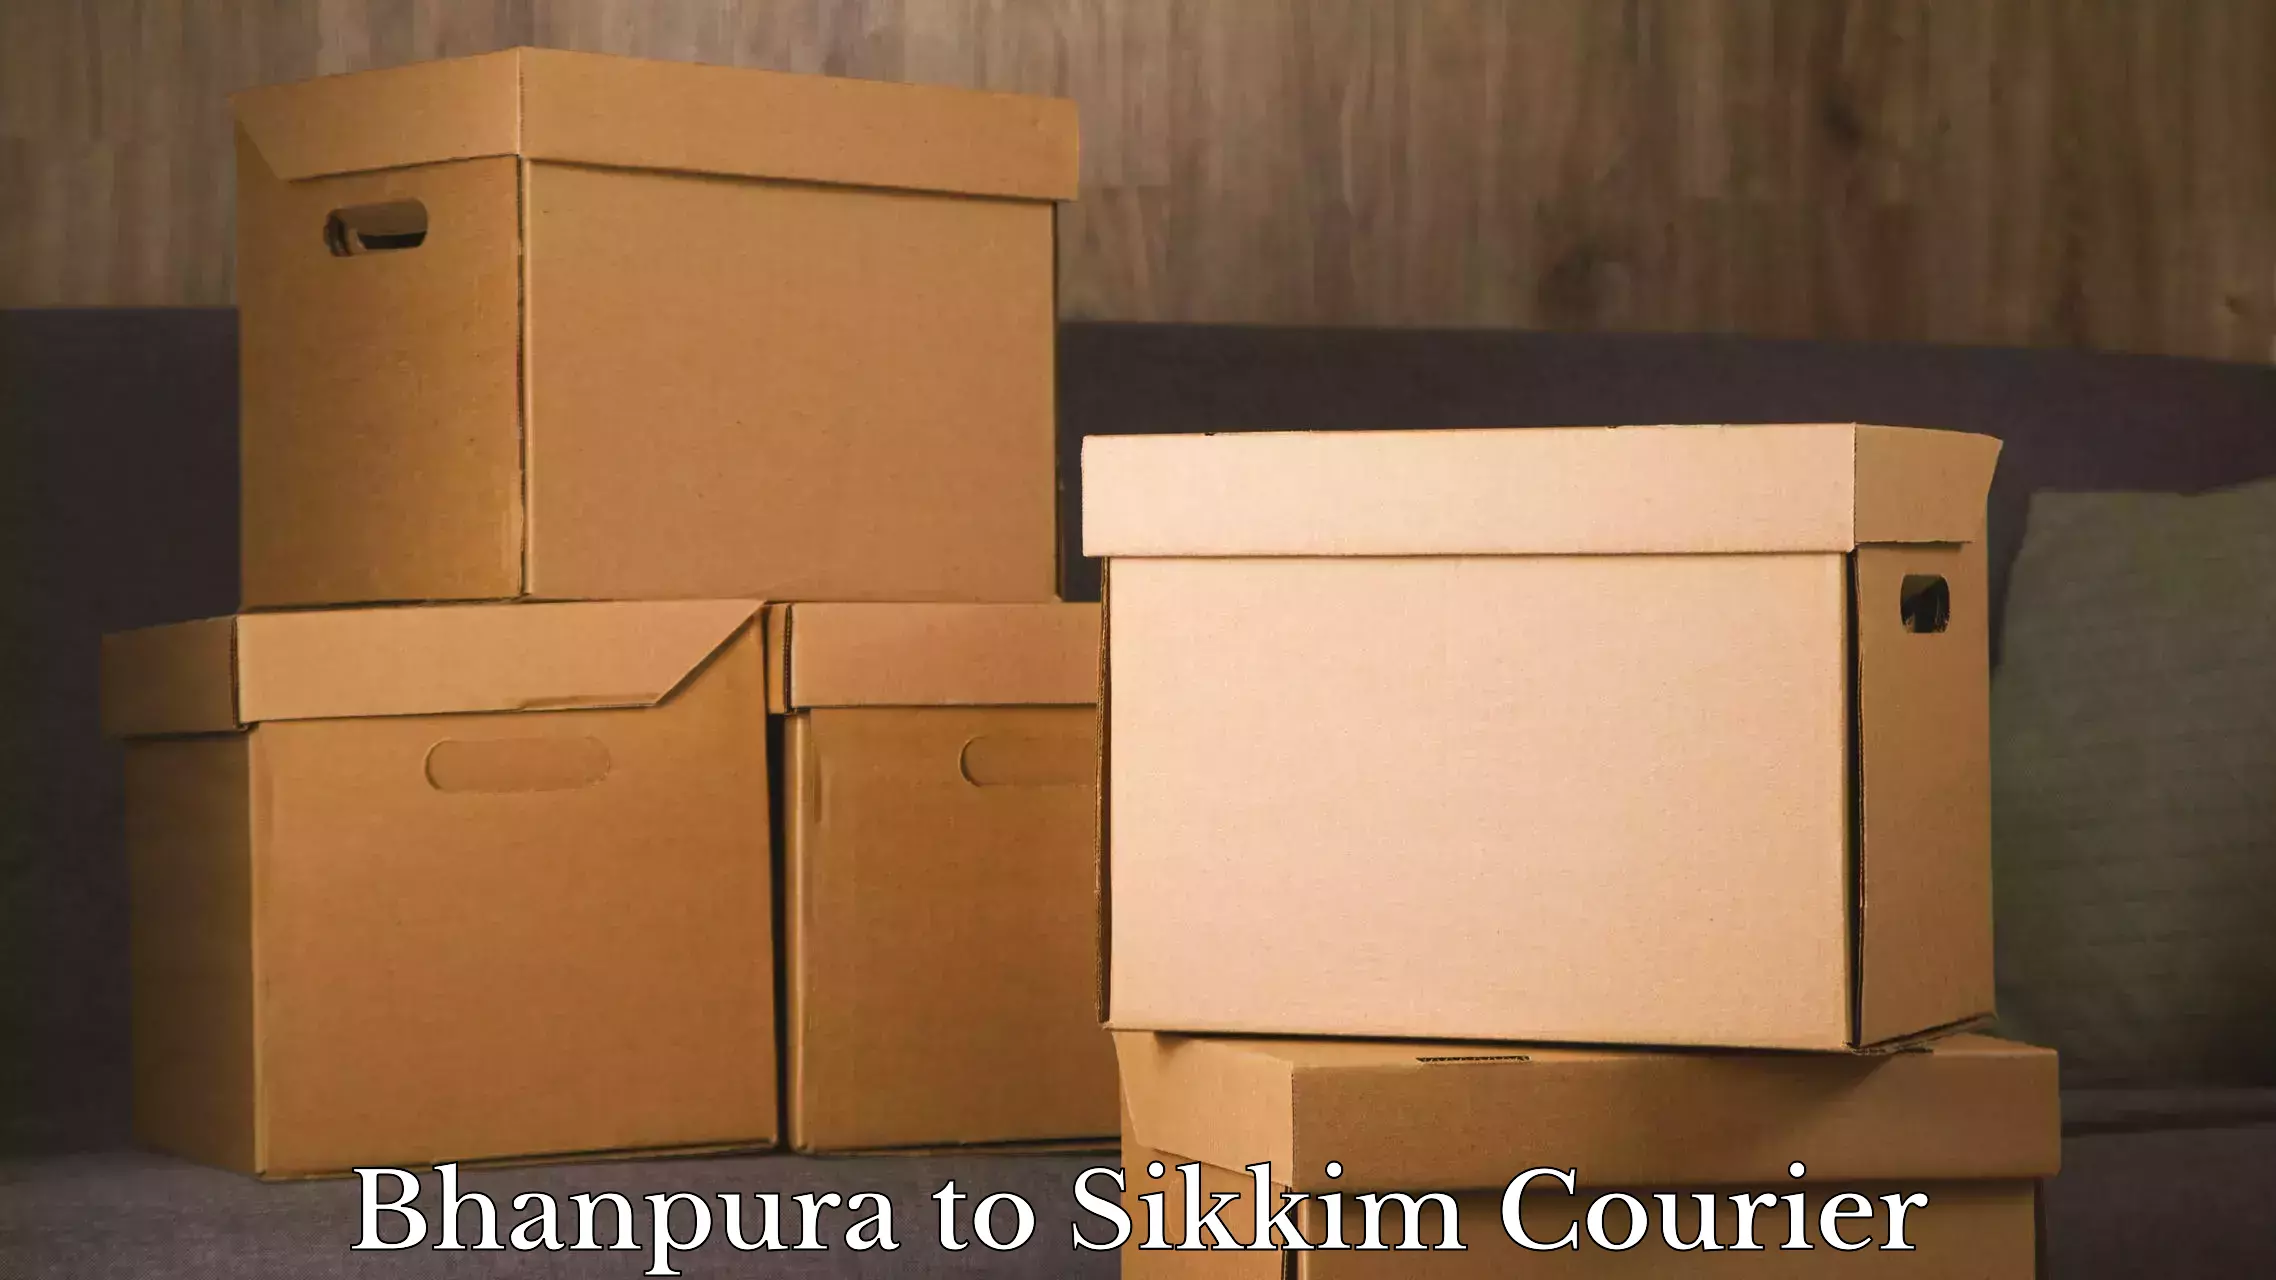 Emergency baggage service Bhanpura to South Sikkim